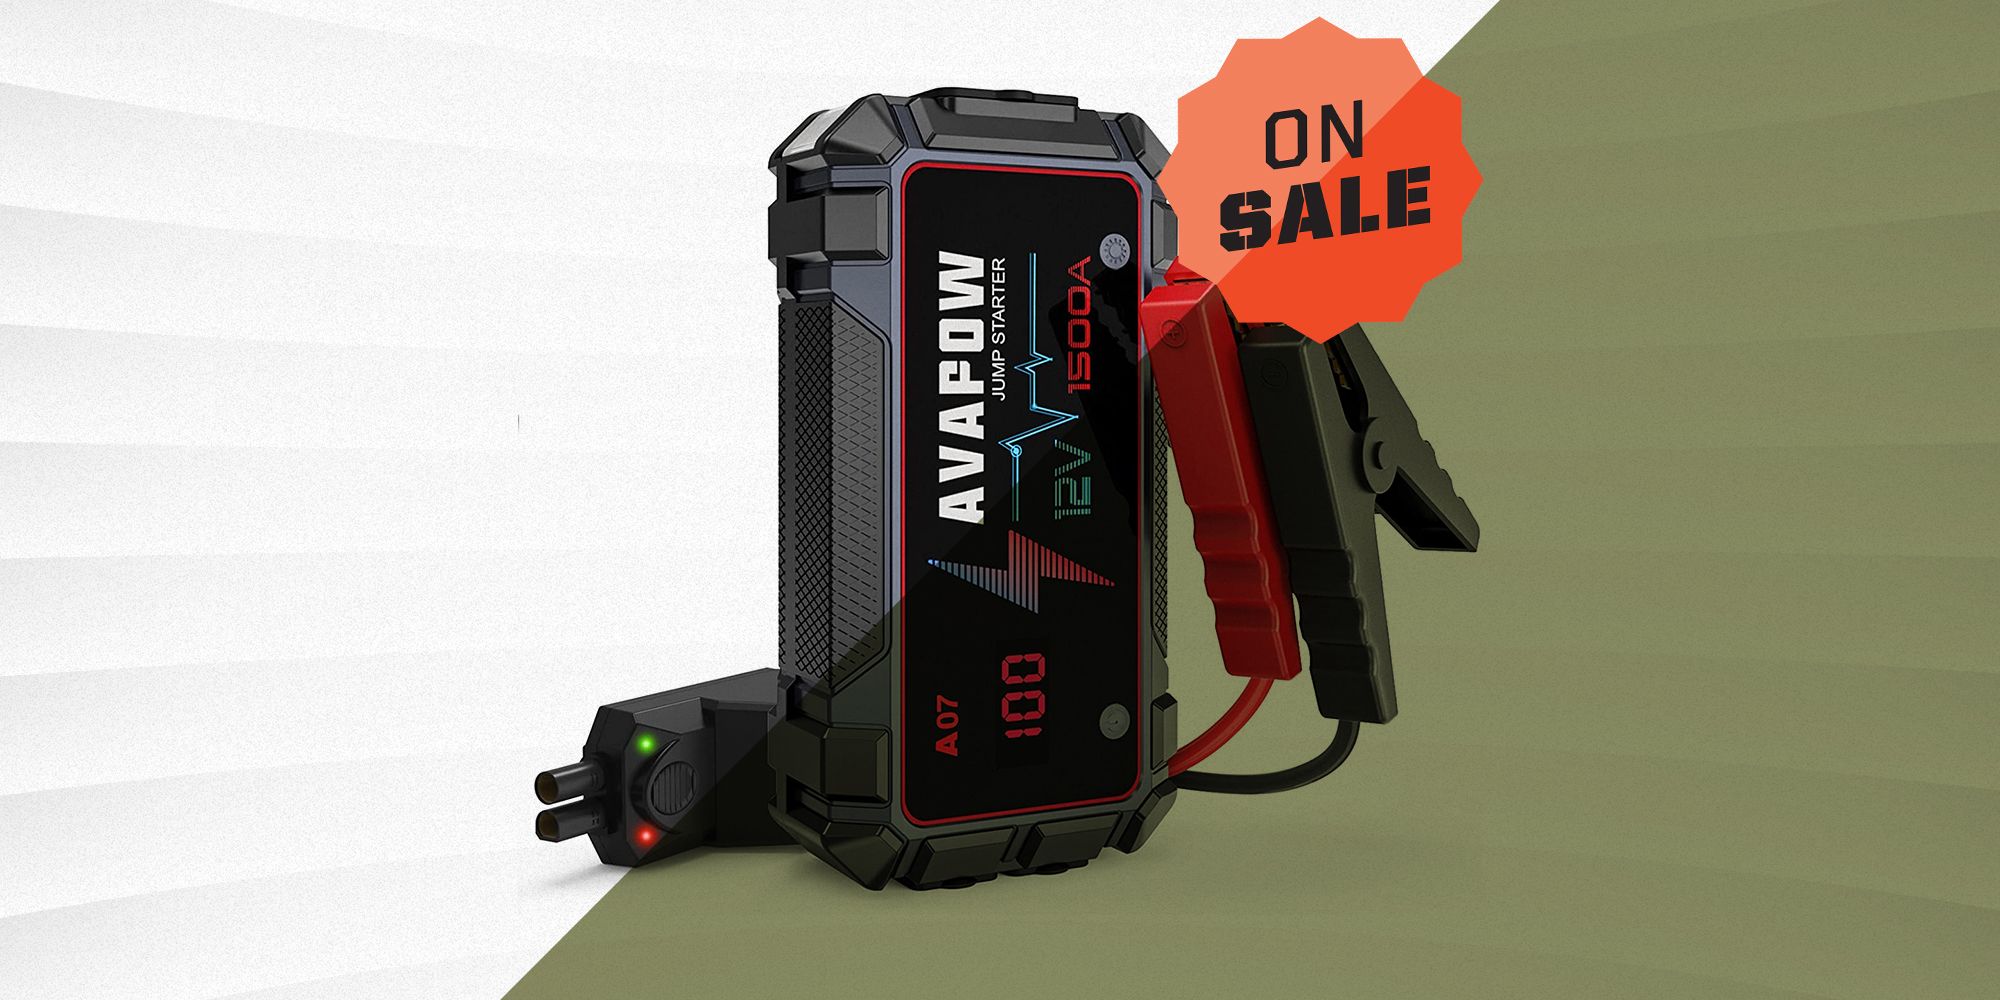 The Avapow jump starter is on sale at